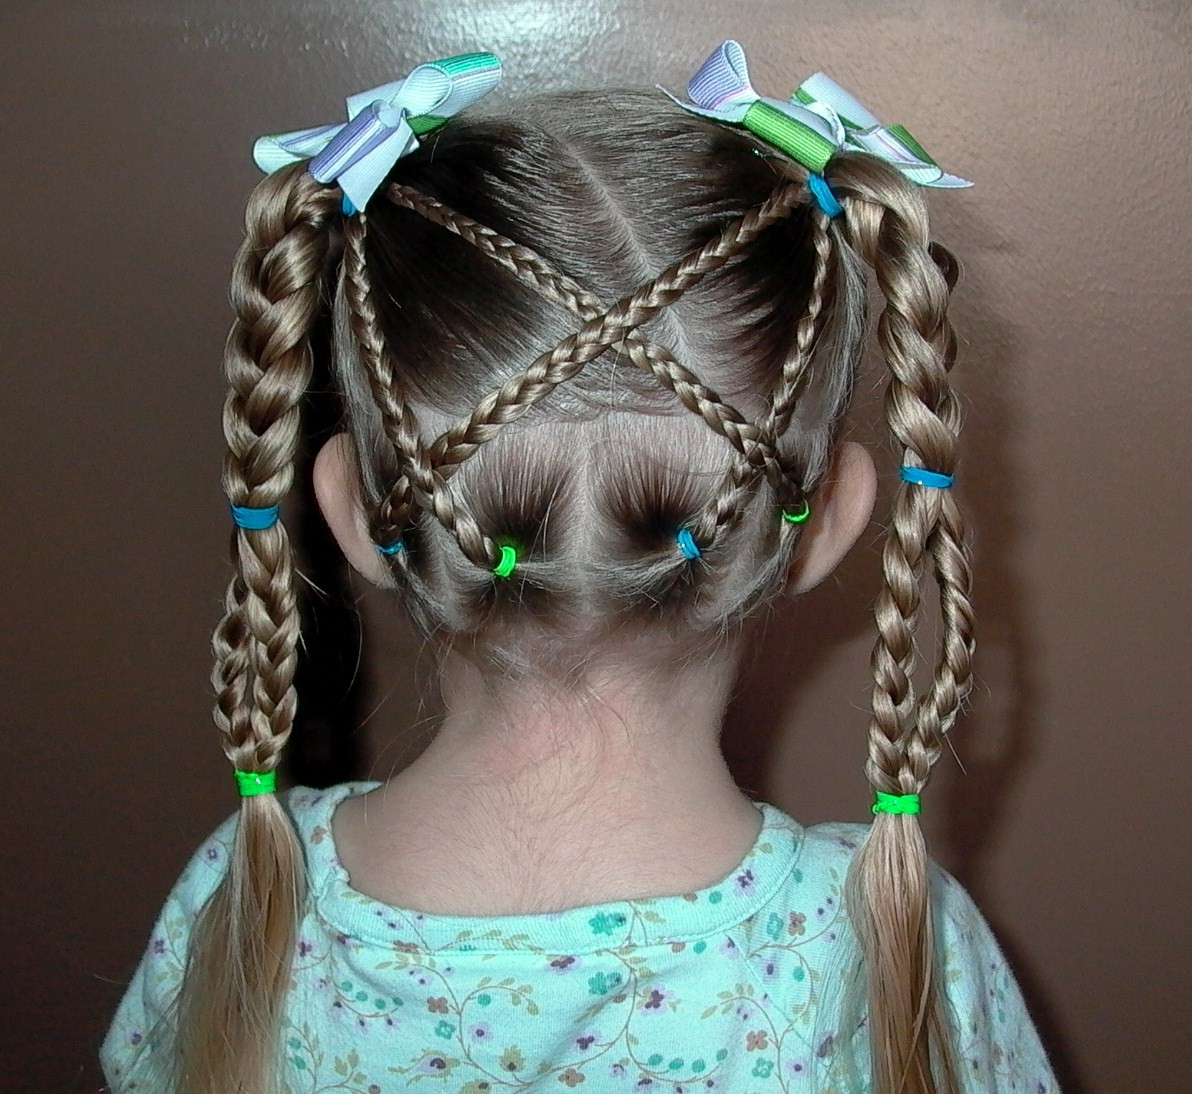 Cute Little Girl Hairstyles Braids
 Braids for Little Girl s Hair Everything About Fashion